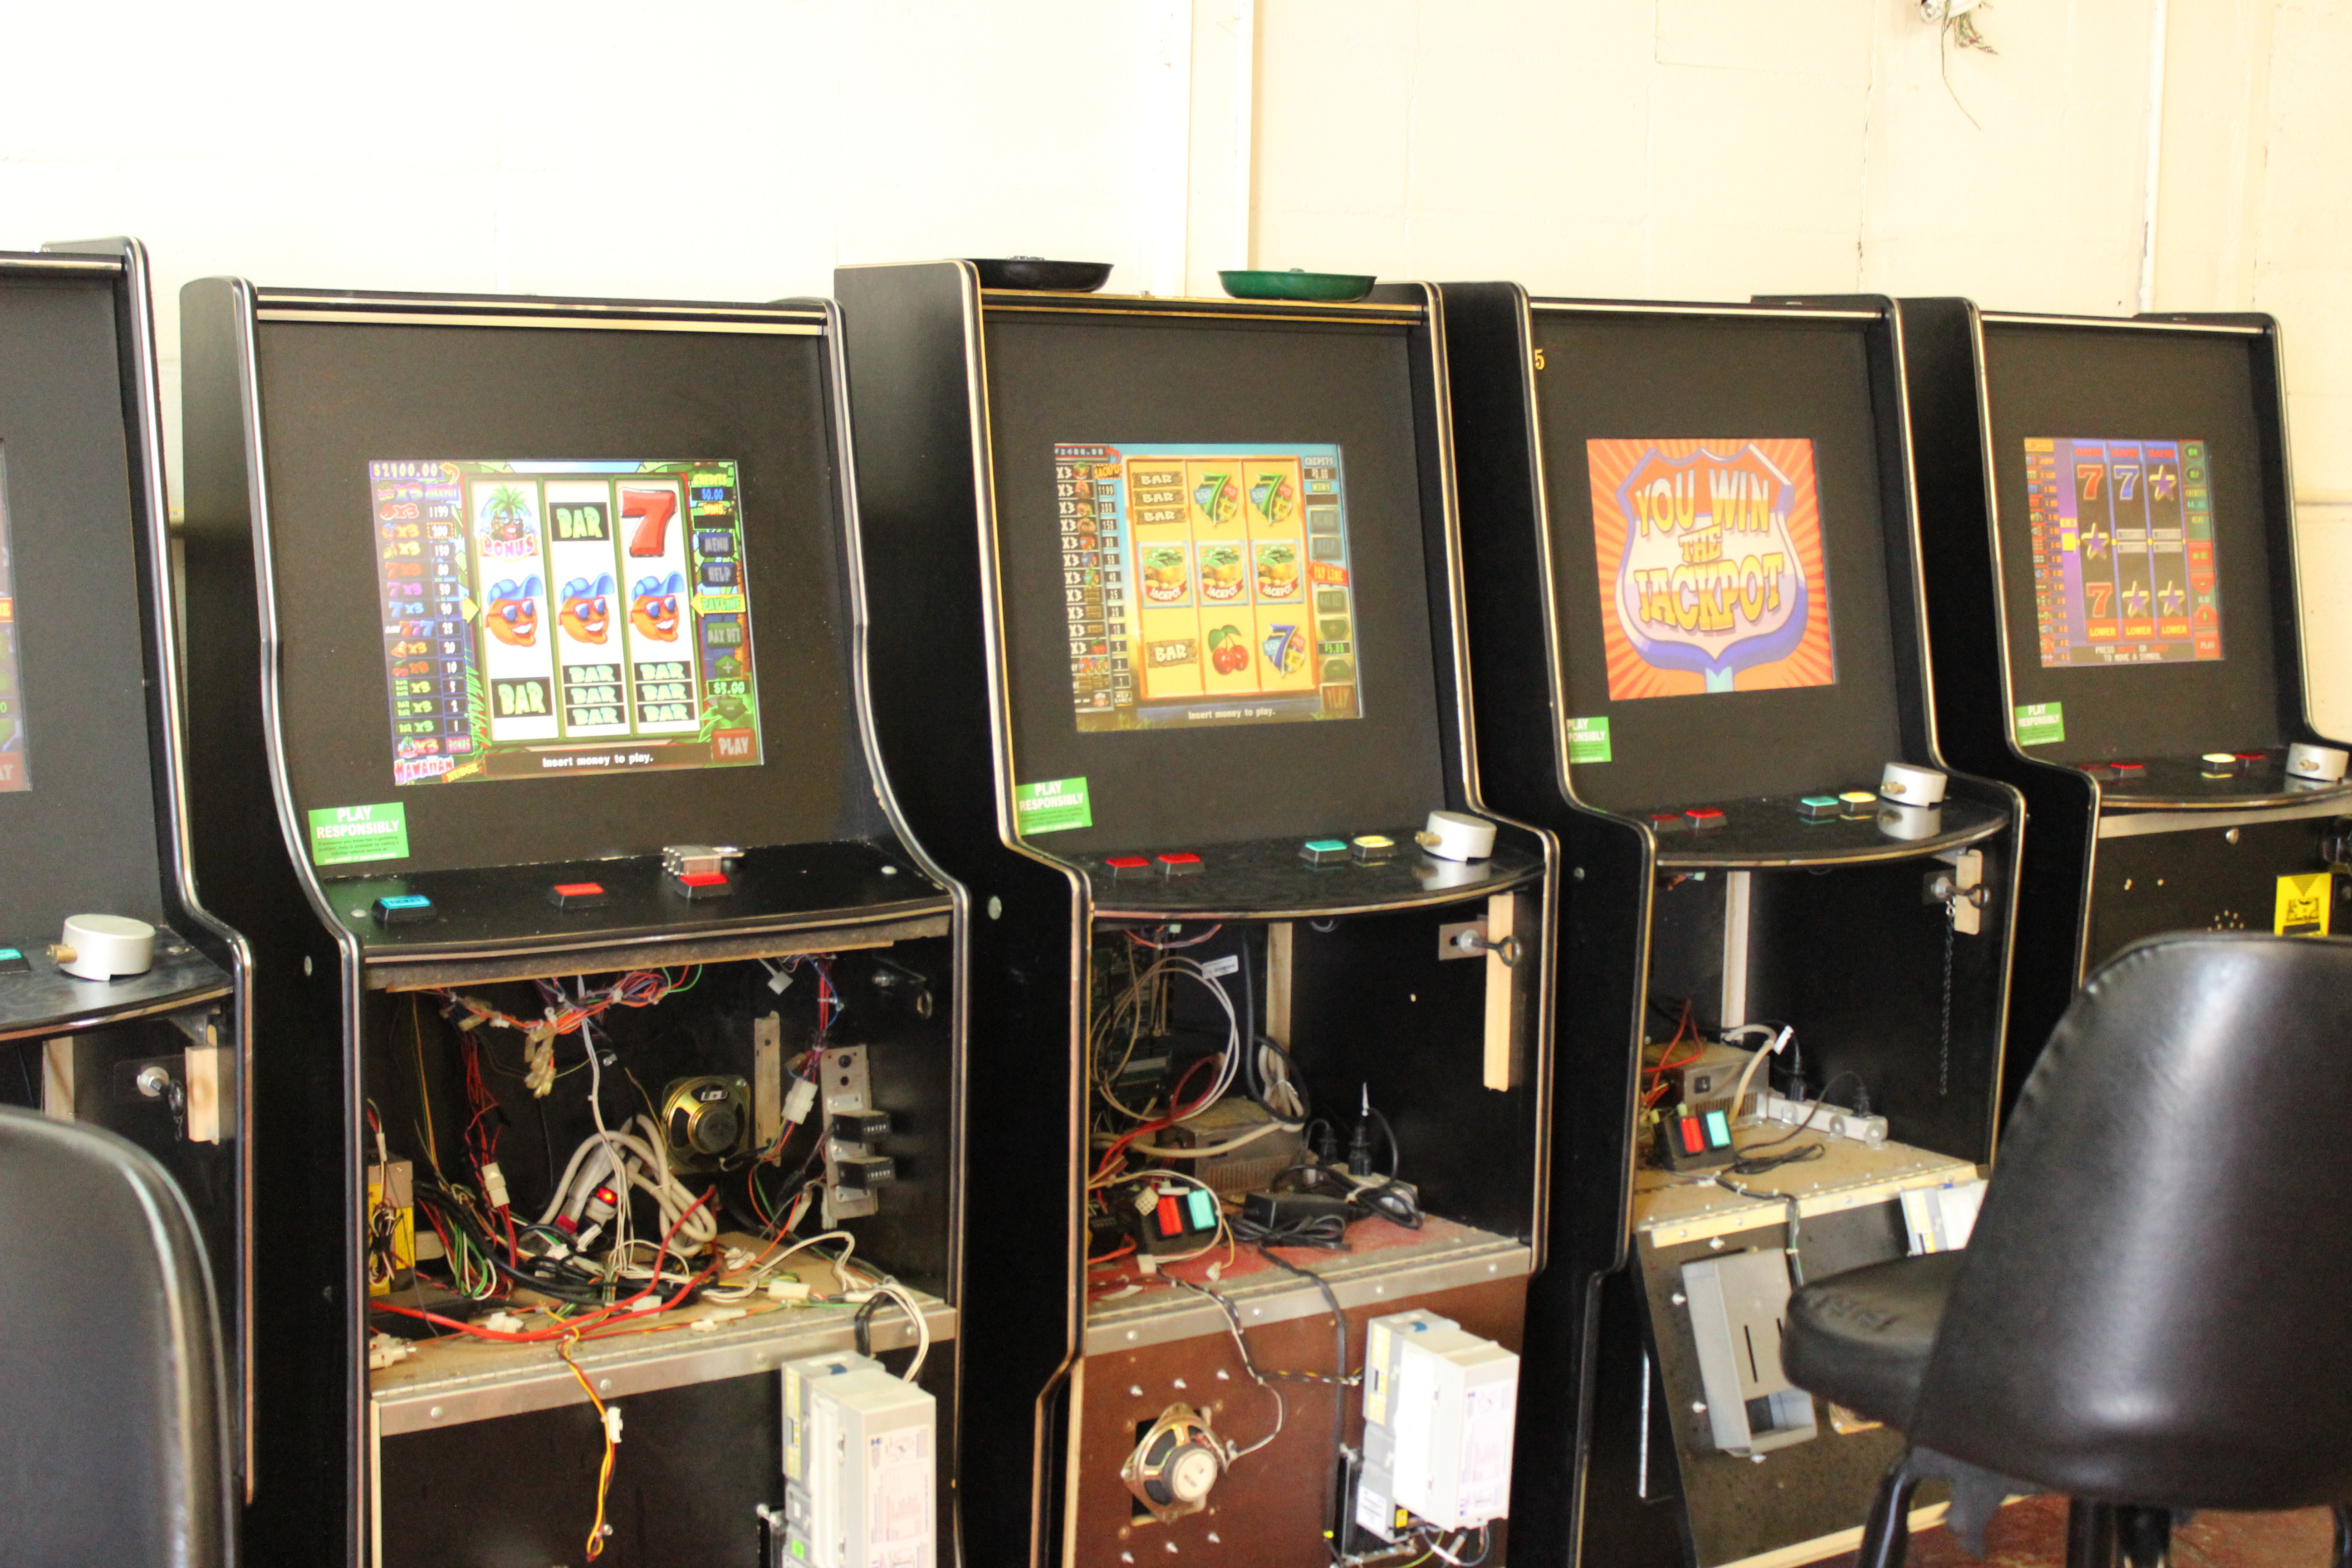 Photo for GAMBLING PLACES RAIDED IN CRISP AND DOUGHERTY COUNTY (PR-18-016)